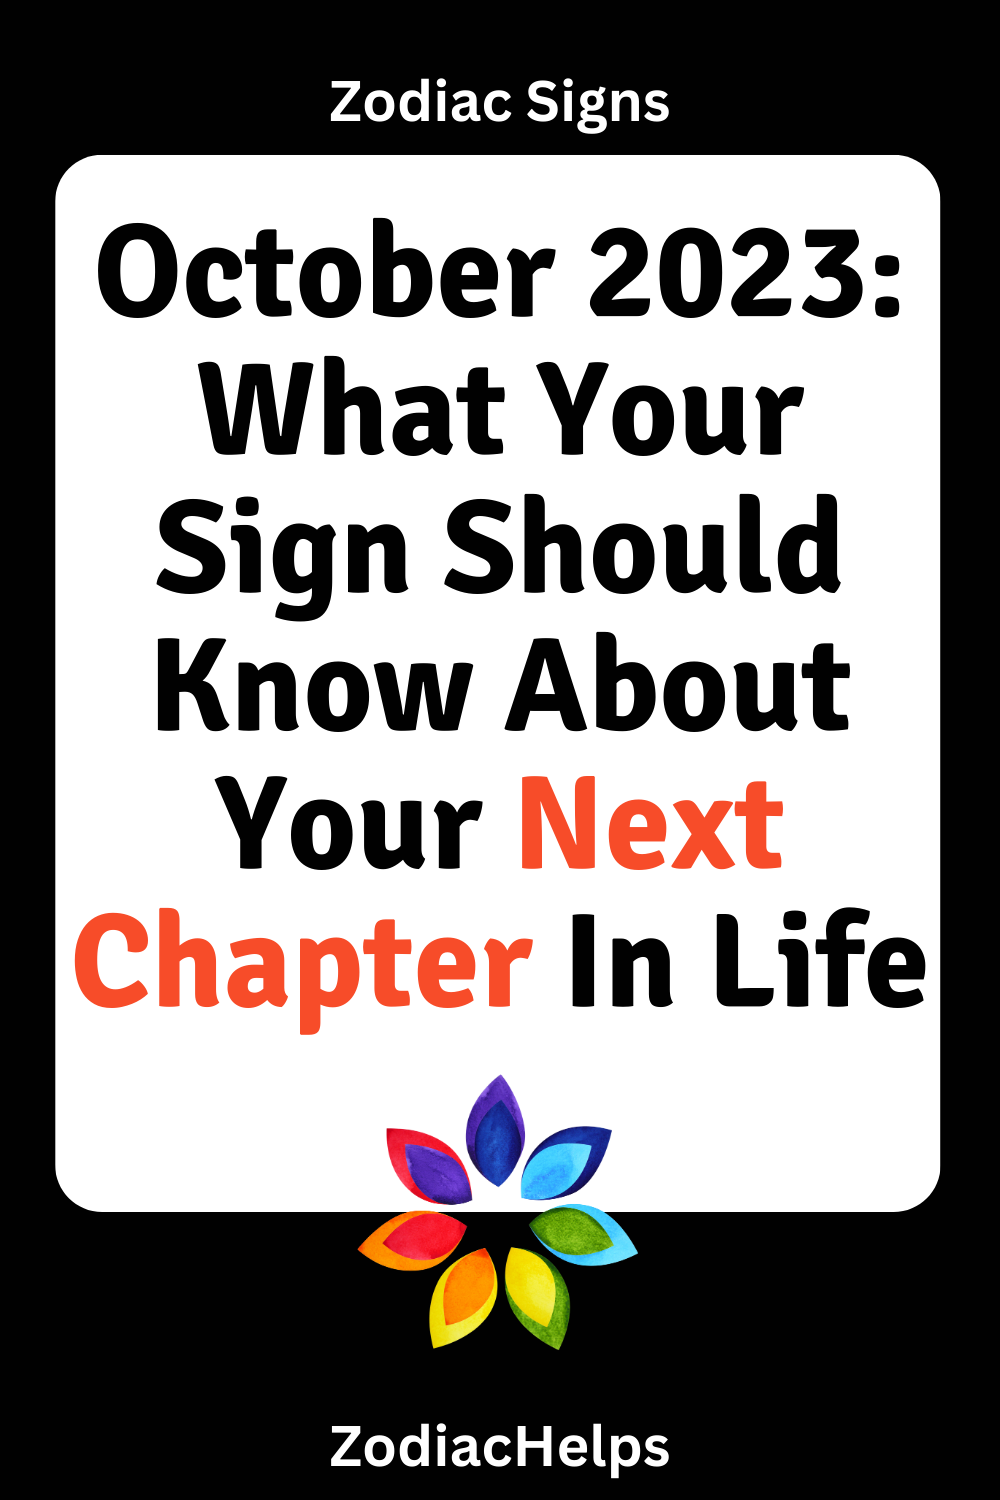 October 2023: What Your Sign Should Know About Your Next Chapter In Life